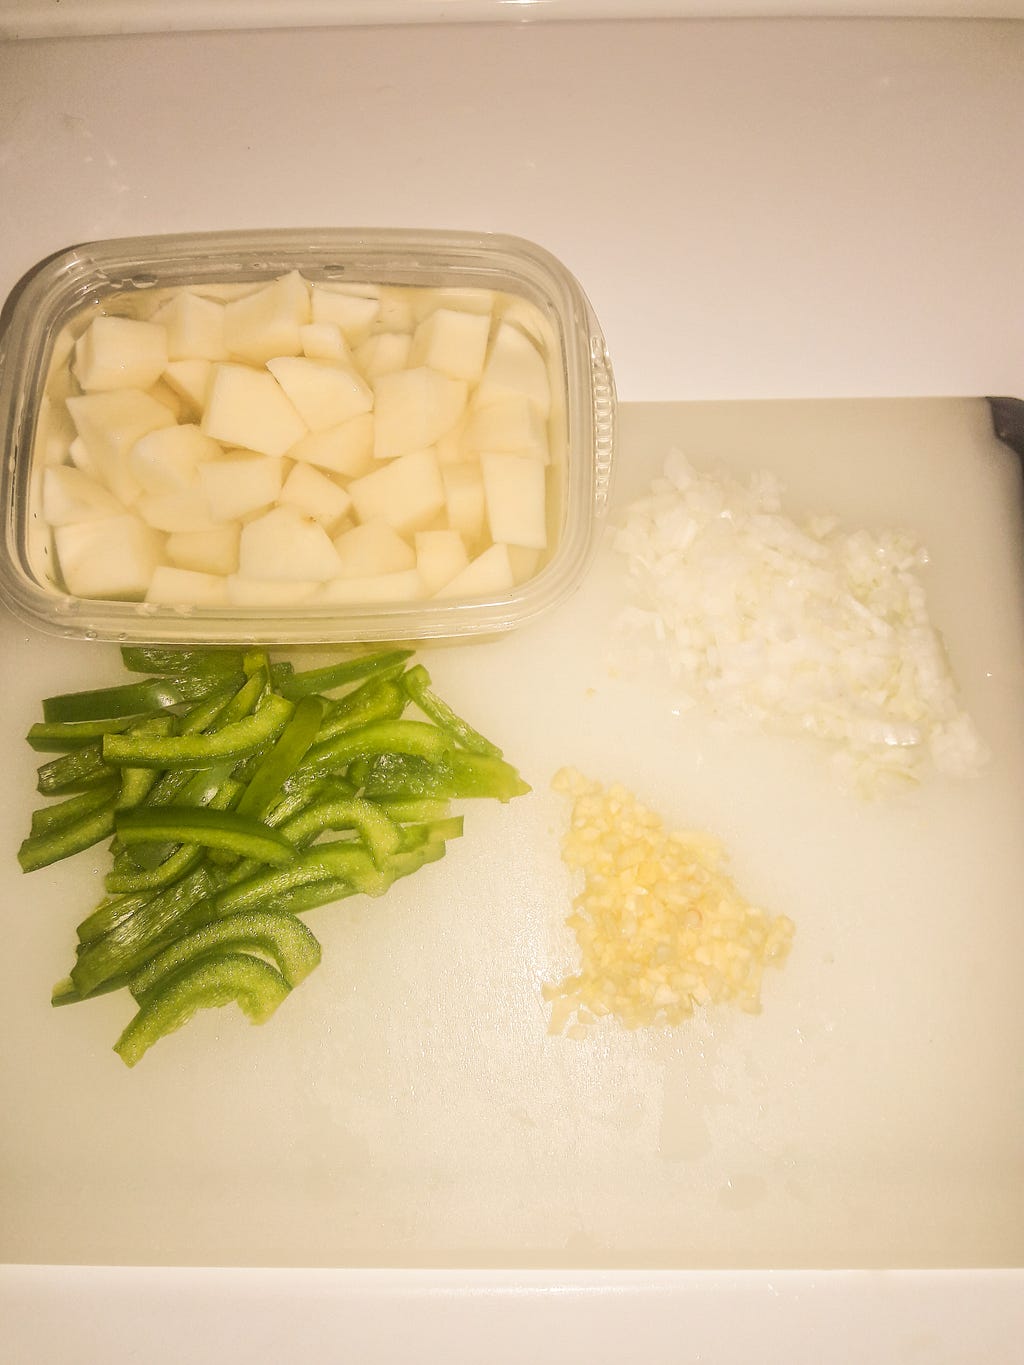 How to Make Bacalao Guisado in 5 Easy Steps — Step 3